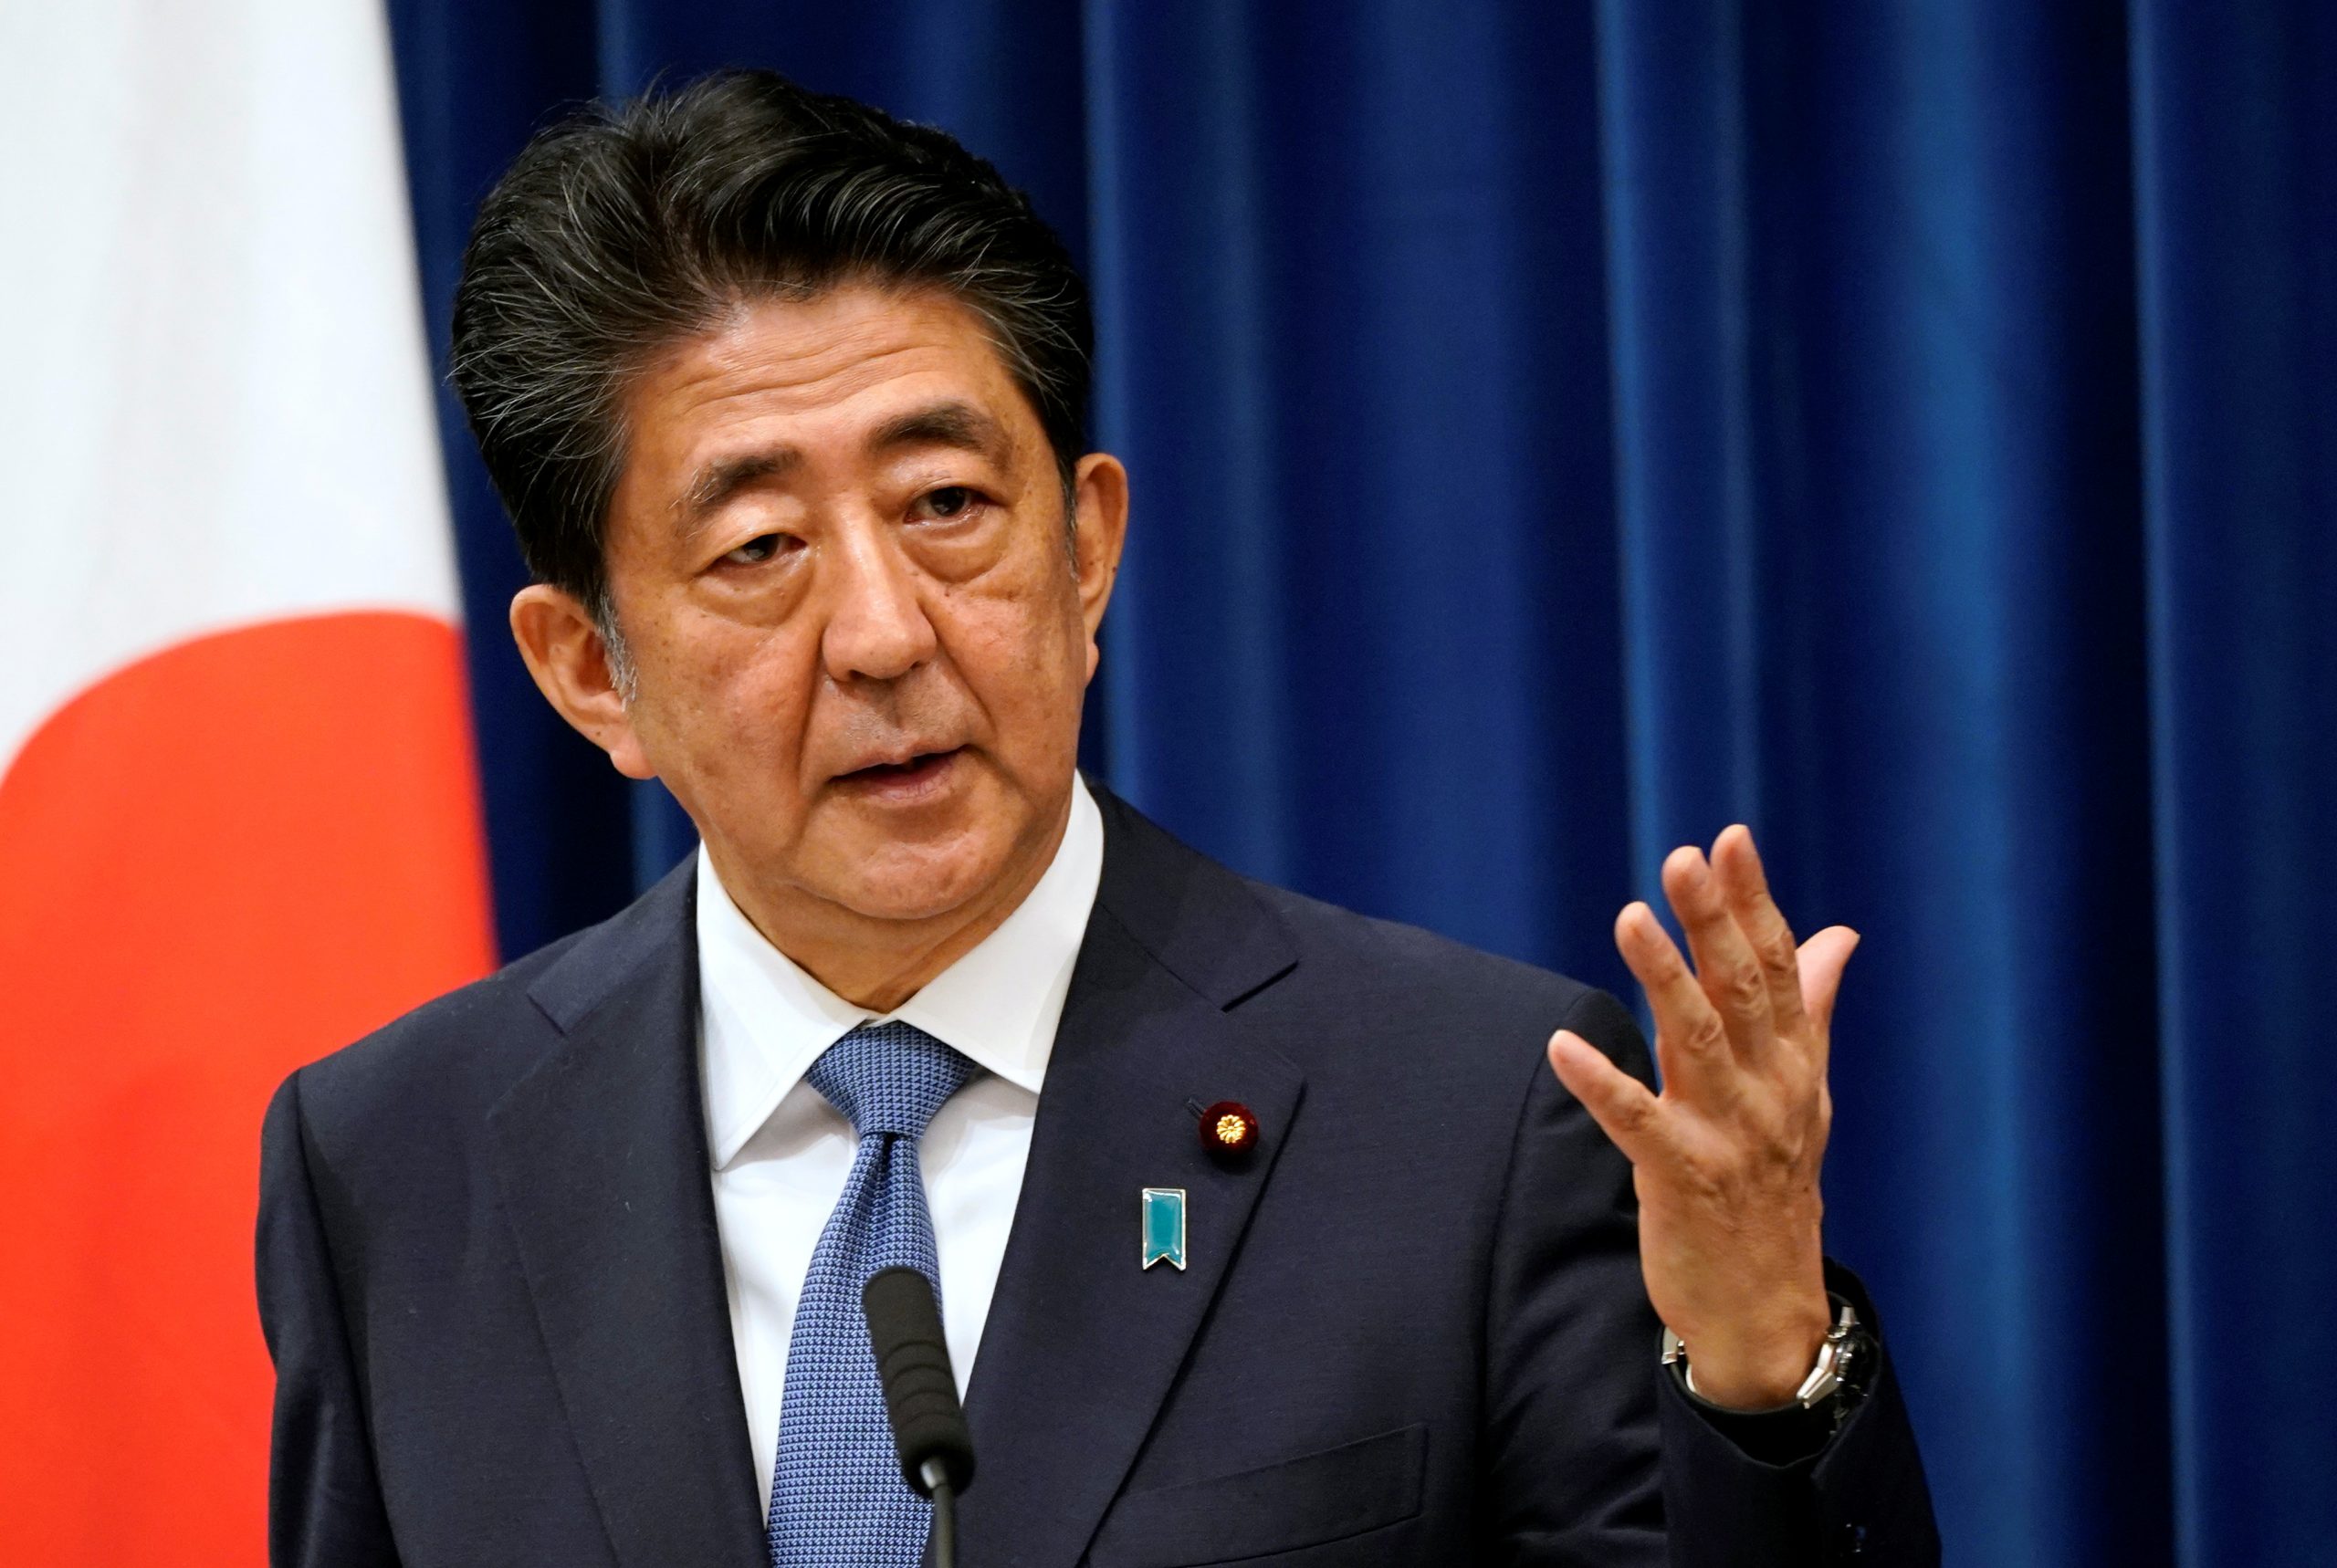 Former Japanese Prime Minister Shinzo Abe was shot during a campaign event in Nara. Image credit: Reuters